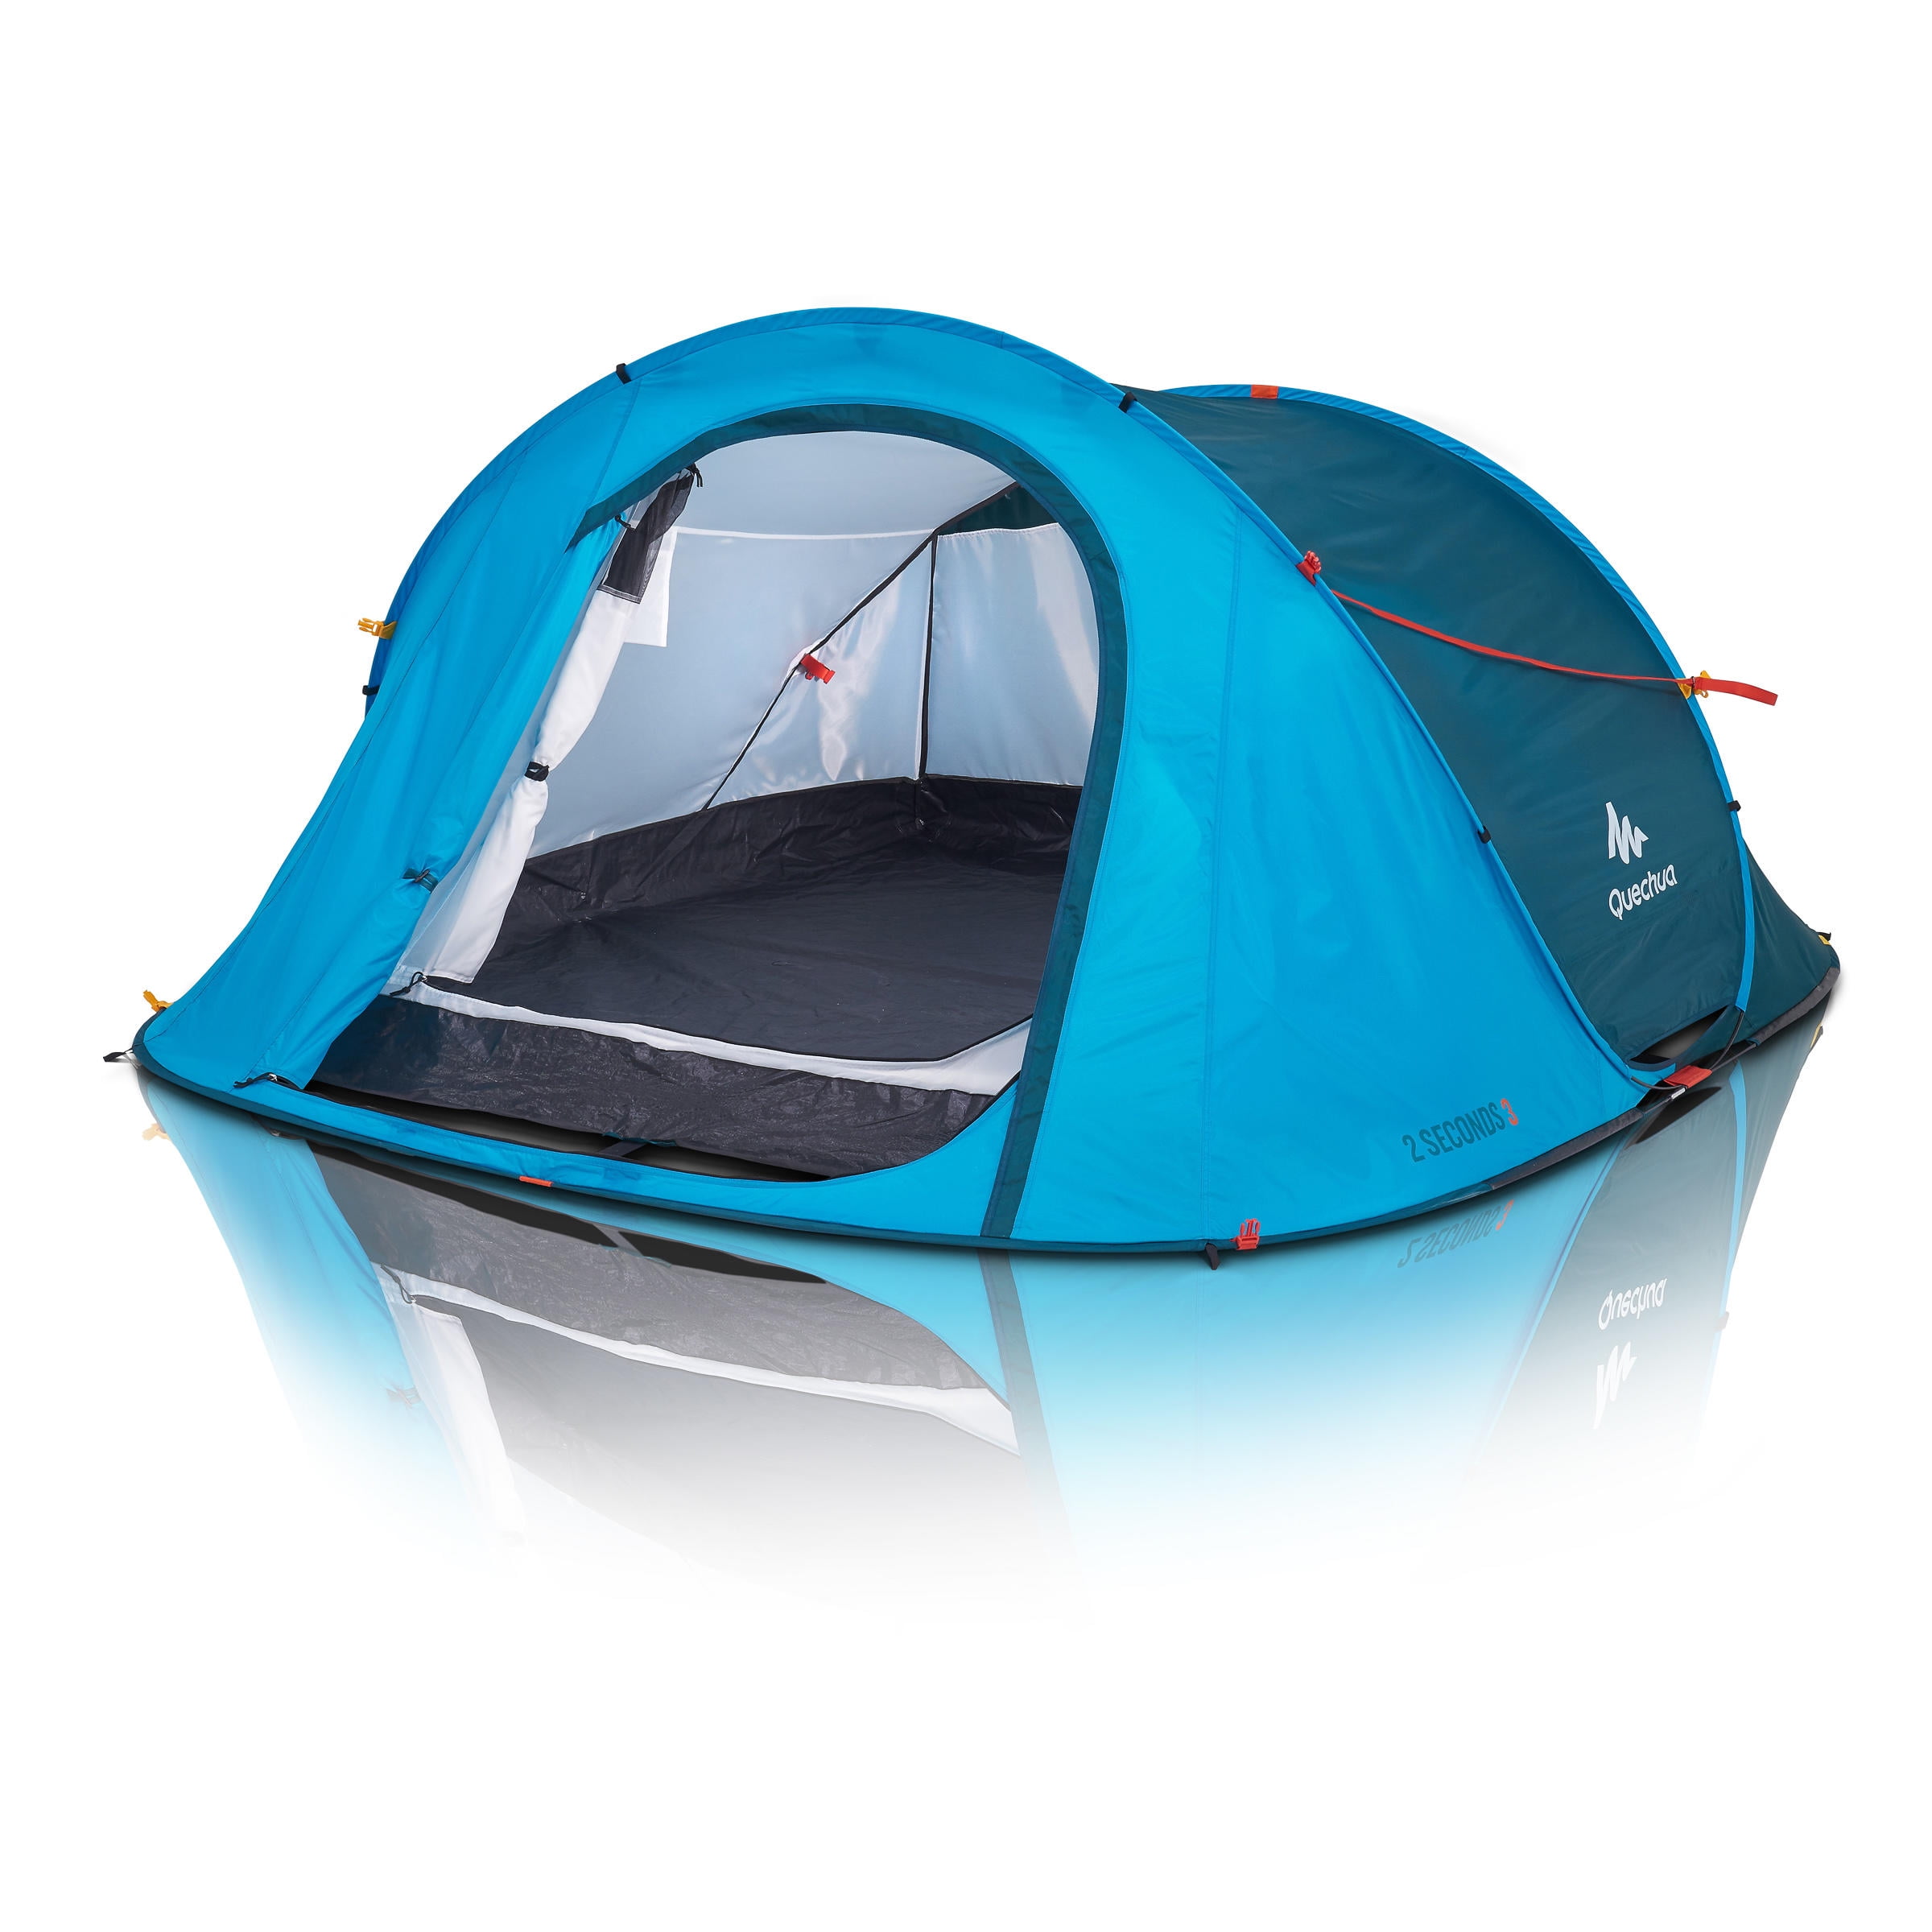 Decathlon Quechua, 3 Peron 2 Second Pop Up Camping Tent, with Waterproof Technology, Double Wall Technology, Blue